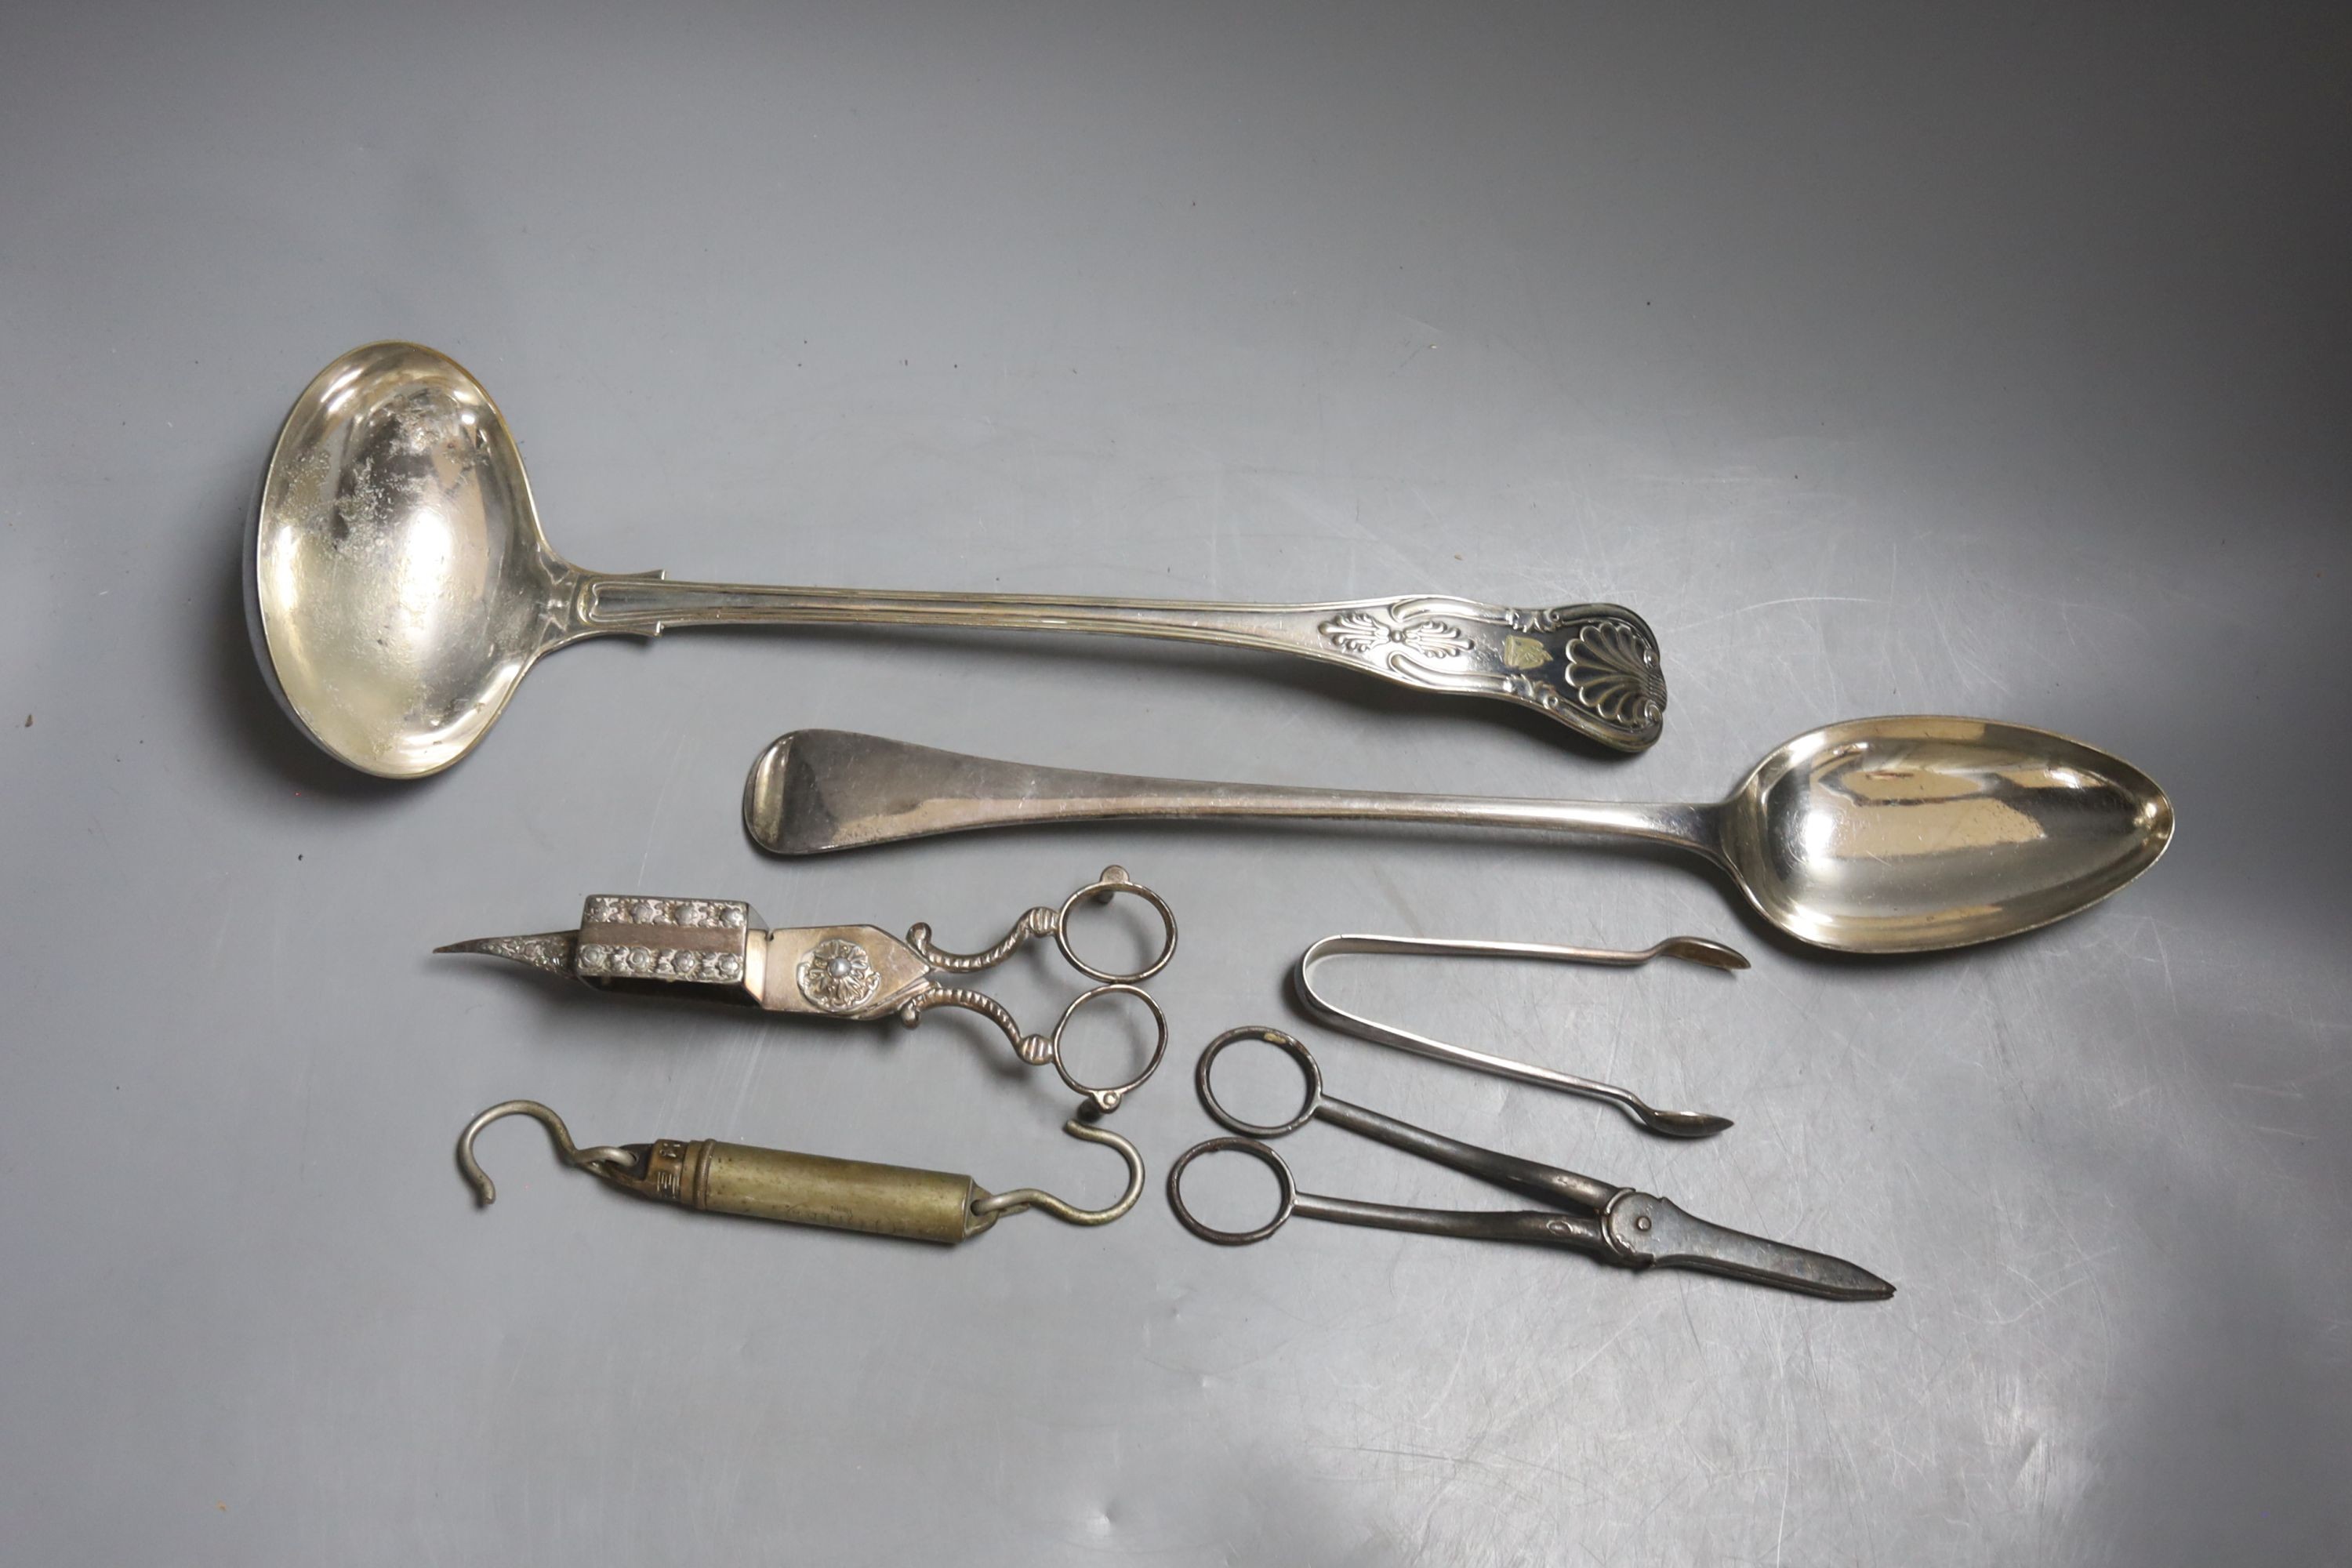 A large plated ladle and basting spoon, two candle snuffers, tongs and spring balance